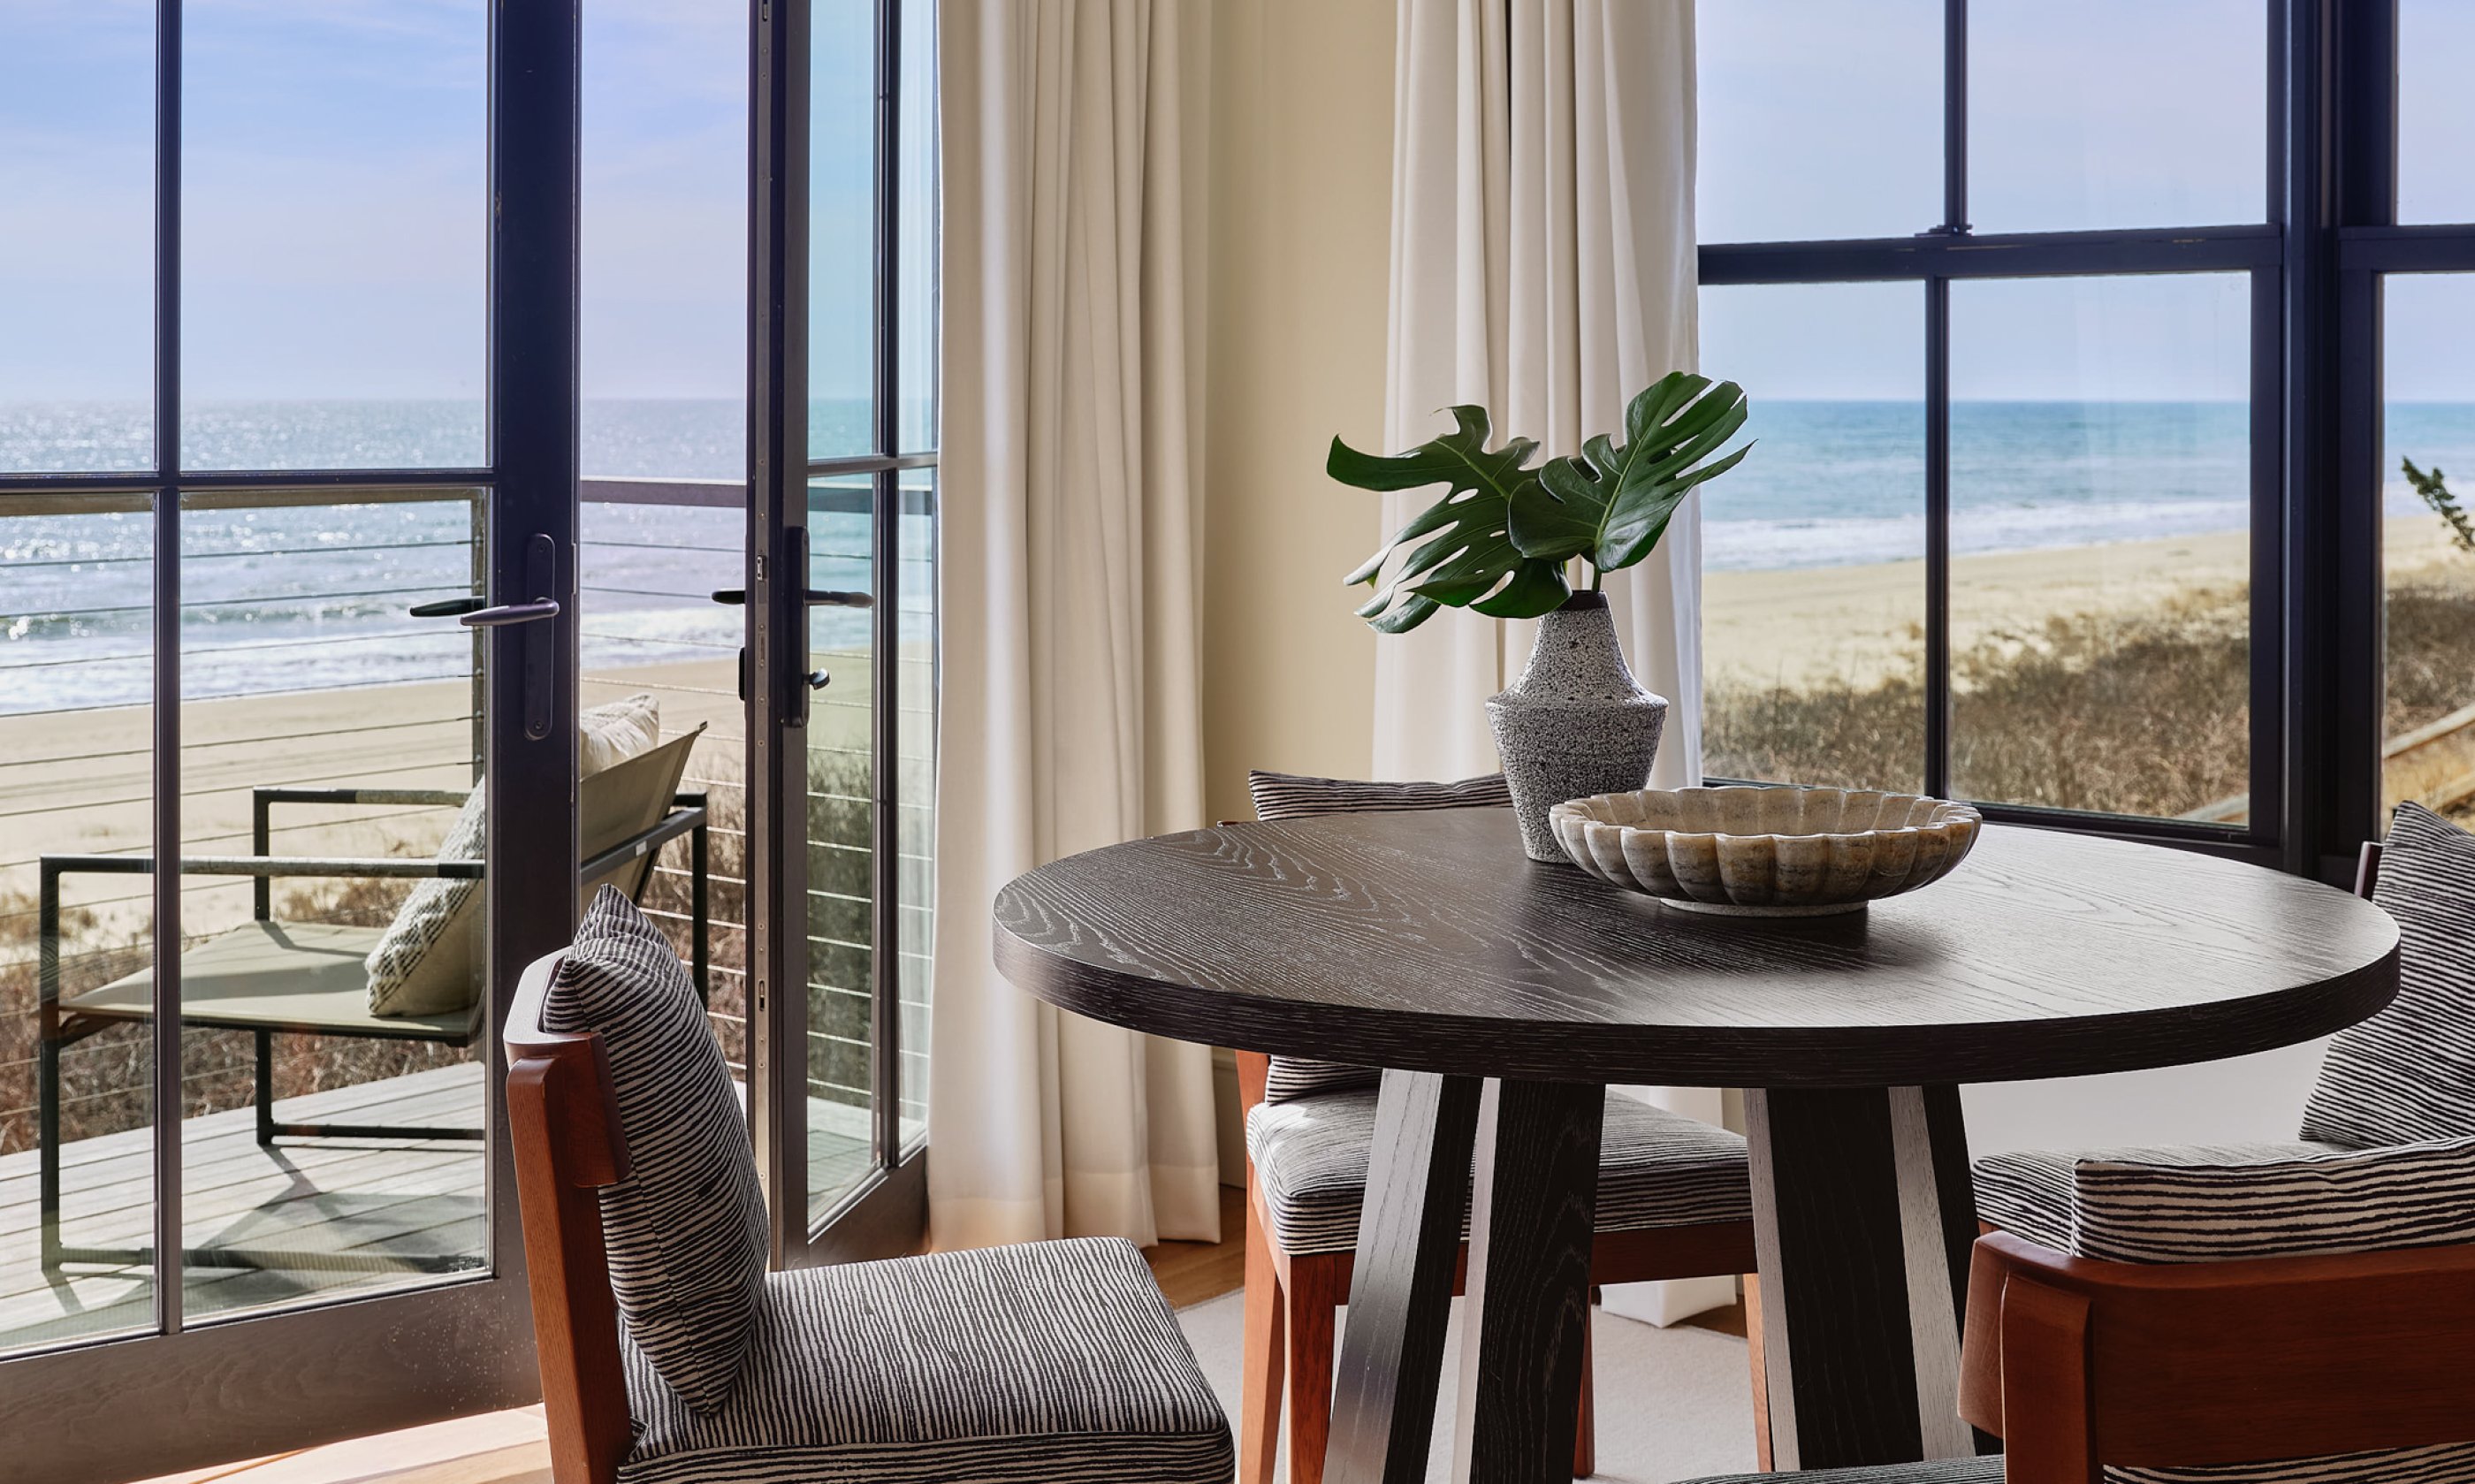 Table and chairs with beach view.